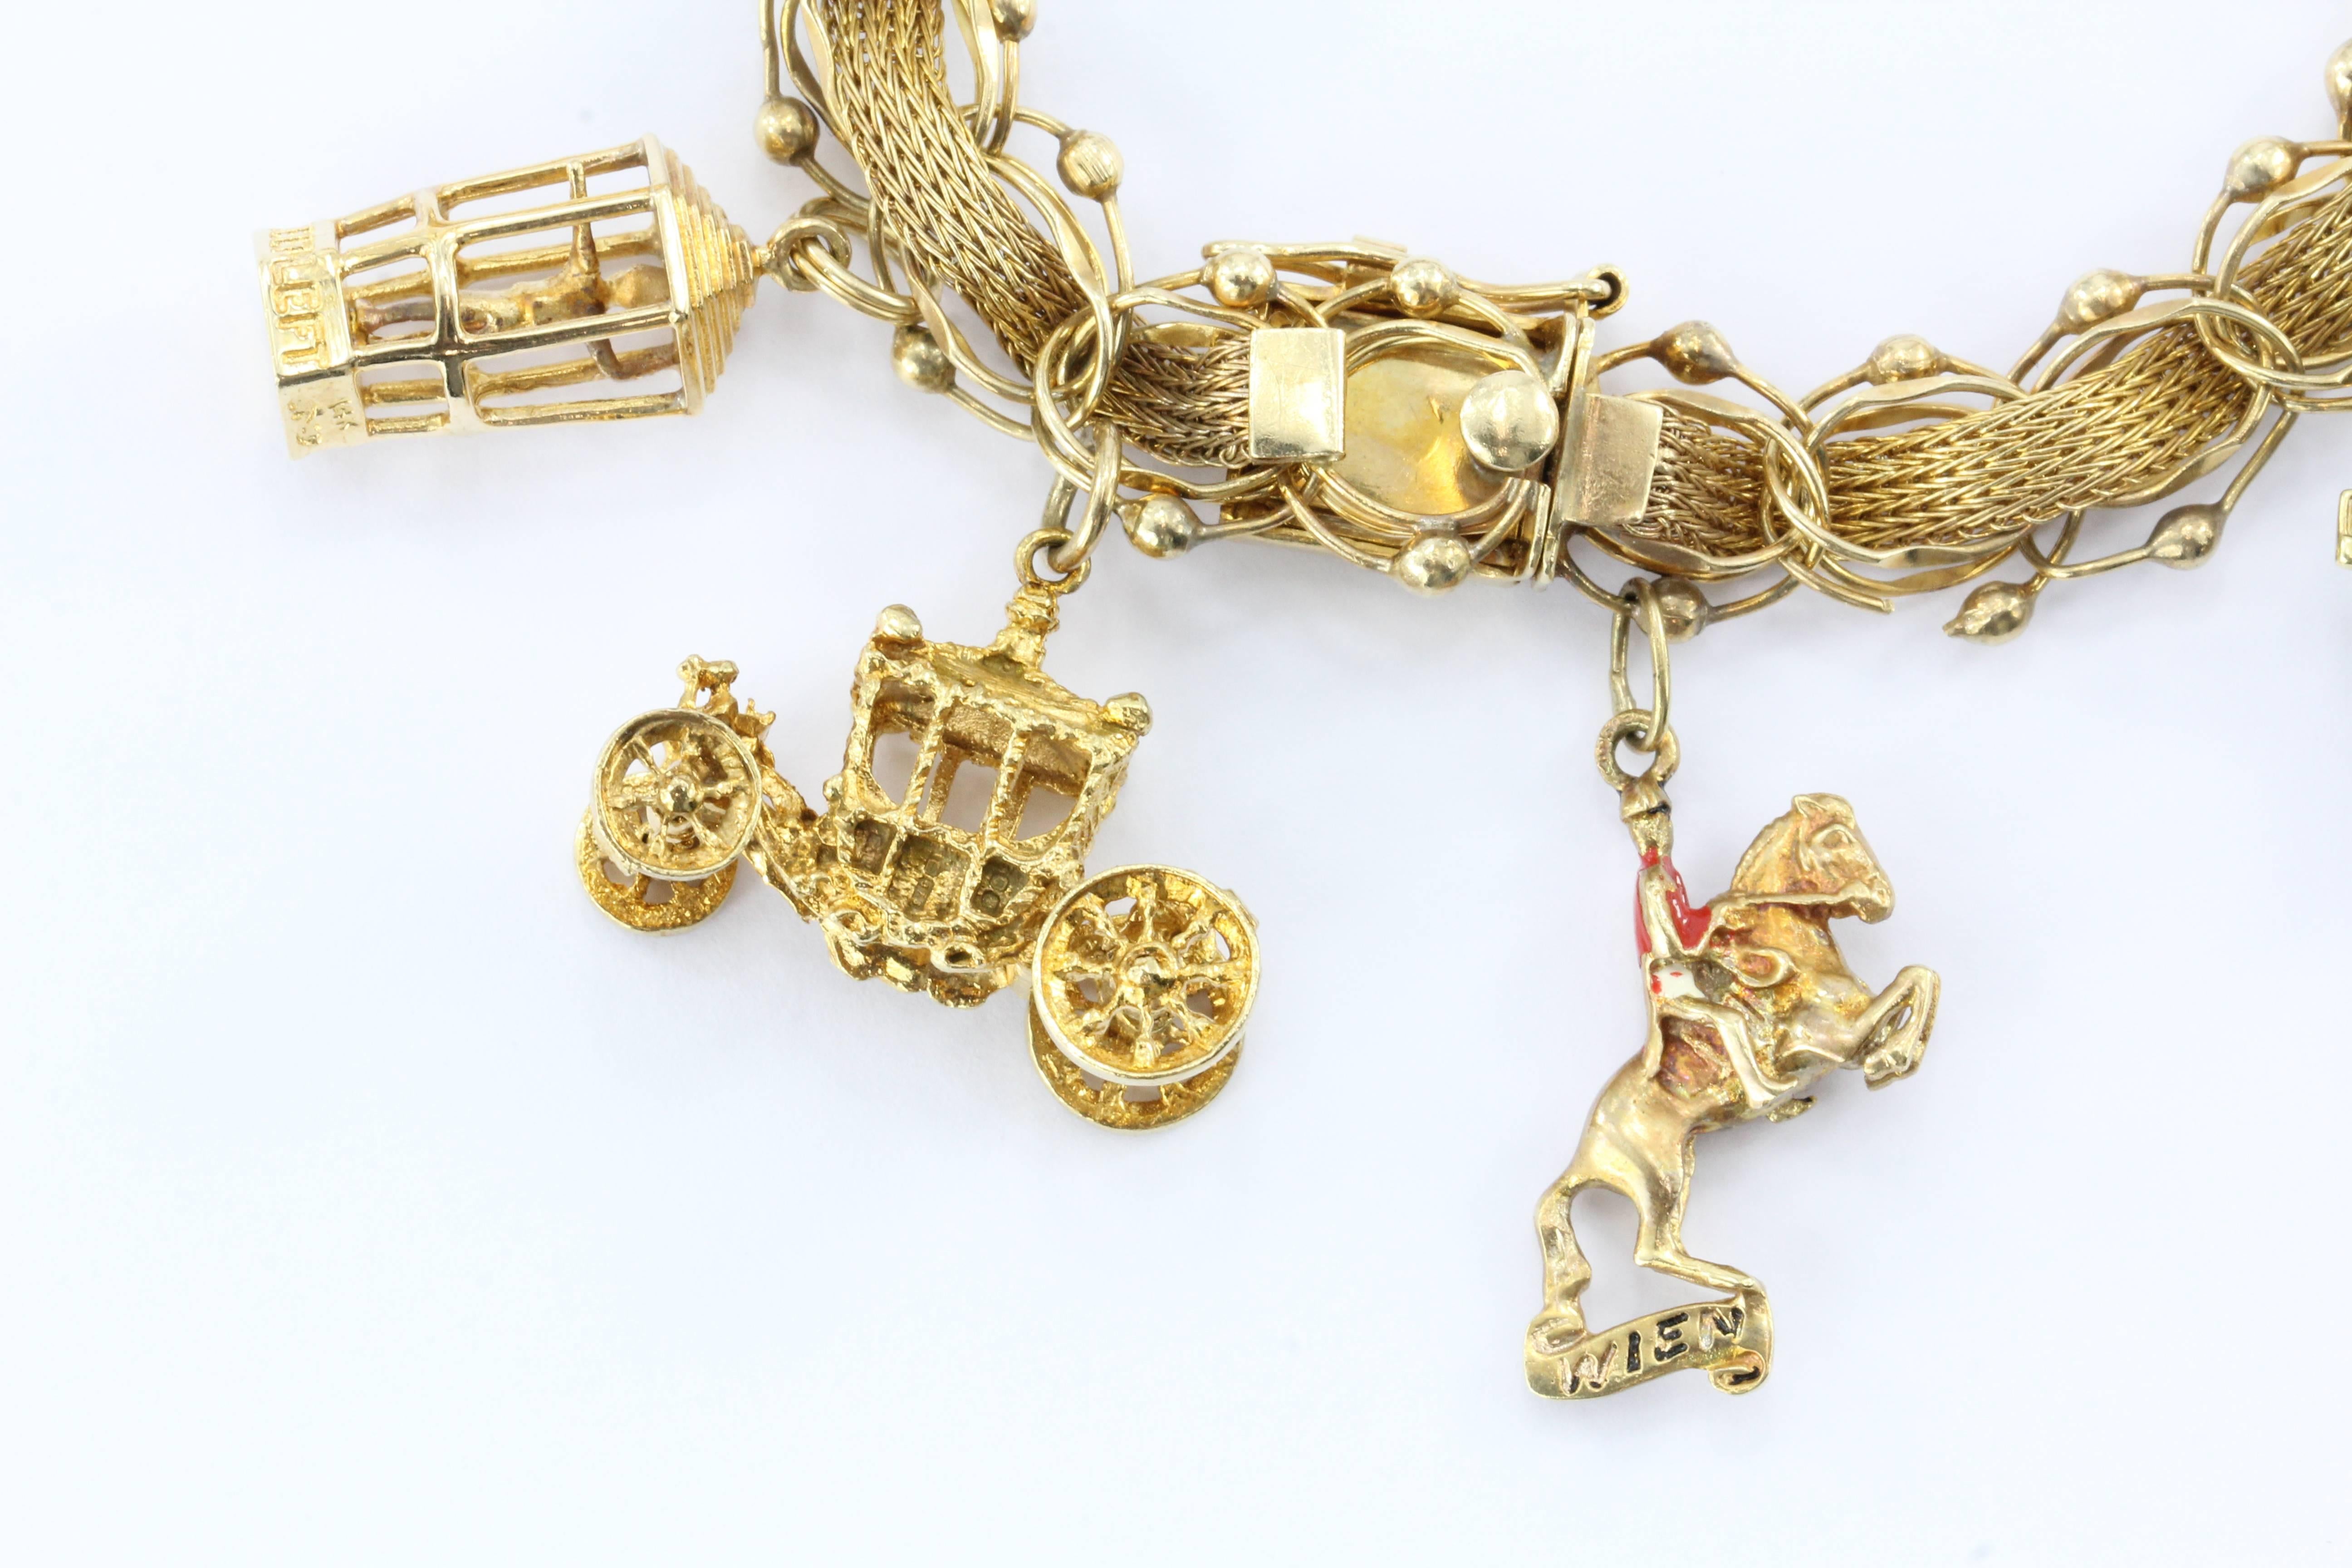 Vintage Yellow Gold World Traveler Charm Bracelet w/ 9 Charms
 
A well loved memento and testament to several journeys this charm bracelet is in excellent estate condition. The bracelet and most of the charms are 14K yellow gold, only the Eiffel